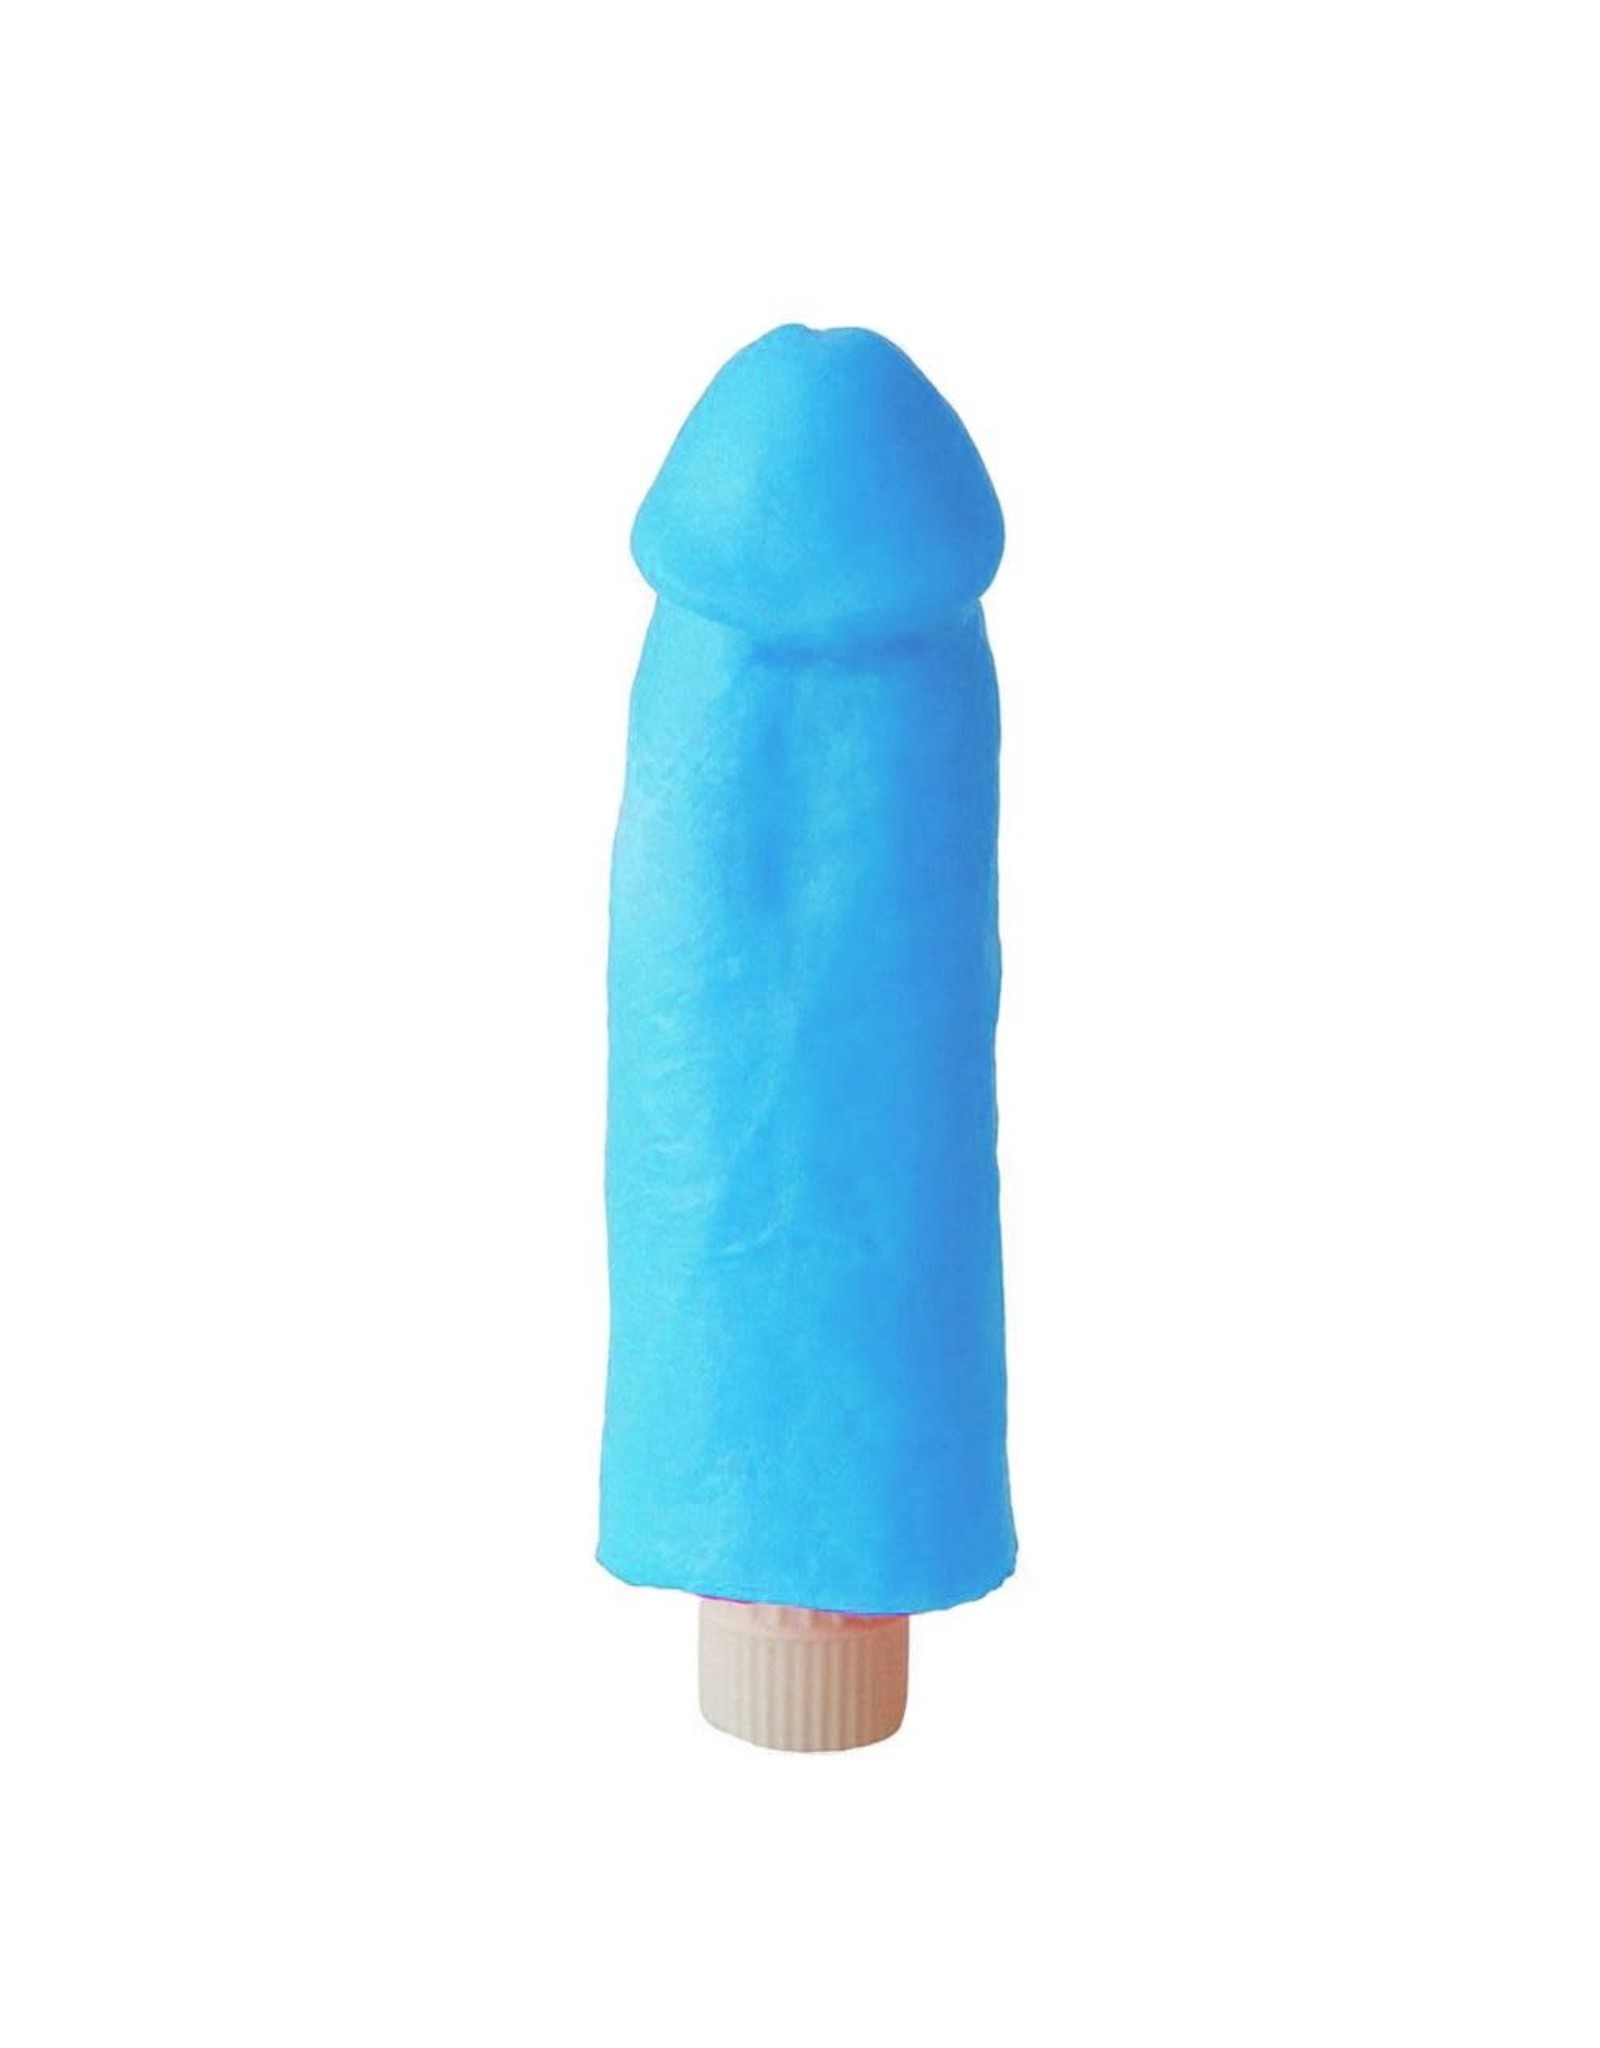 Empire Labs Clone-A-Willy - Glow in the Dark & Vibrating - Blue